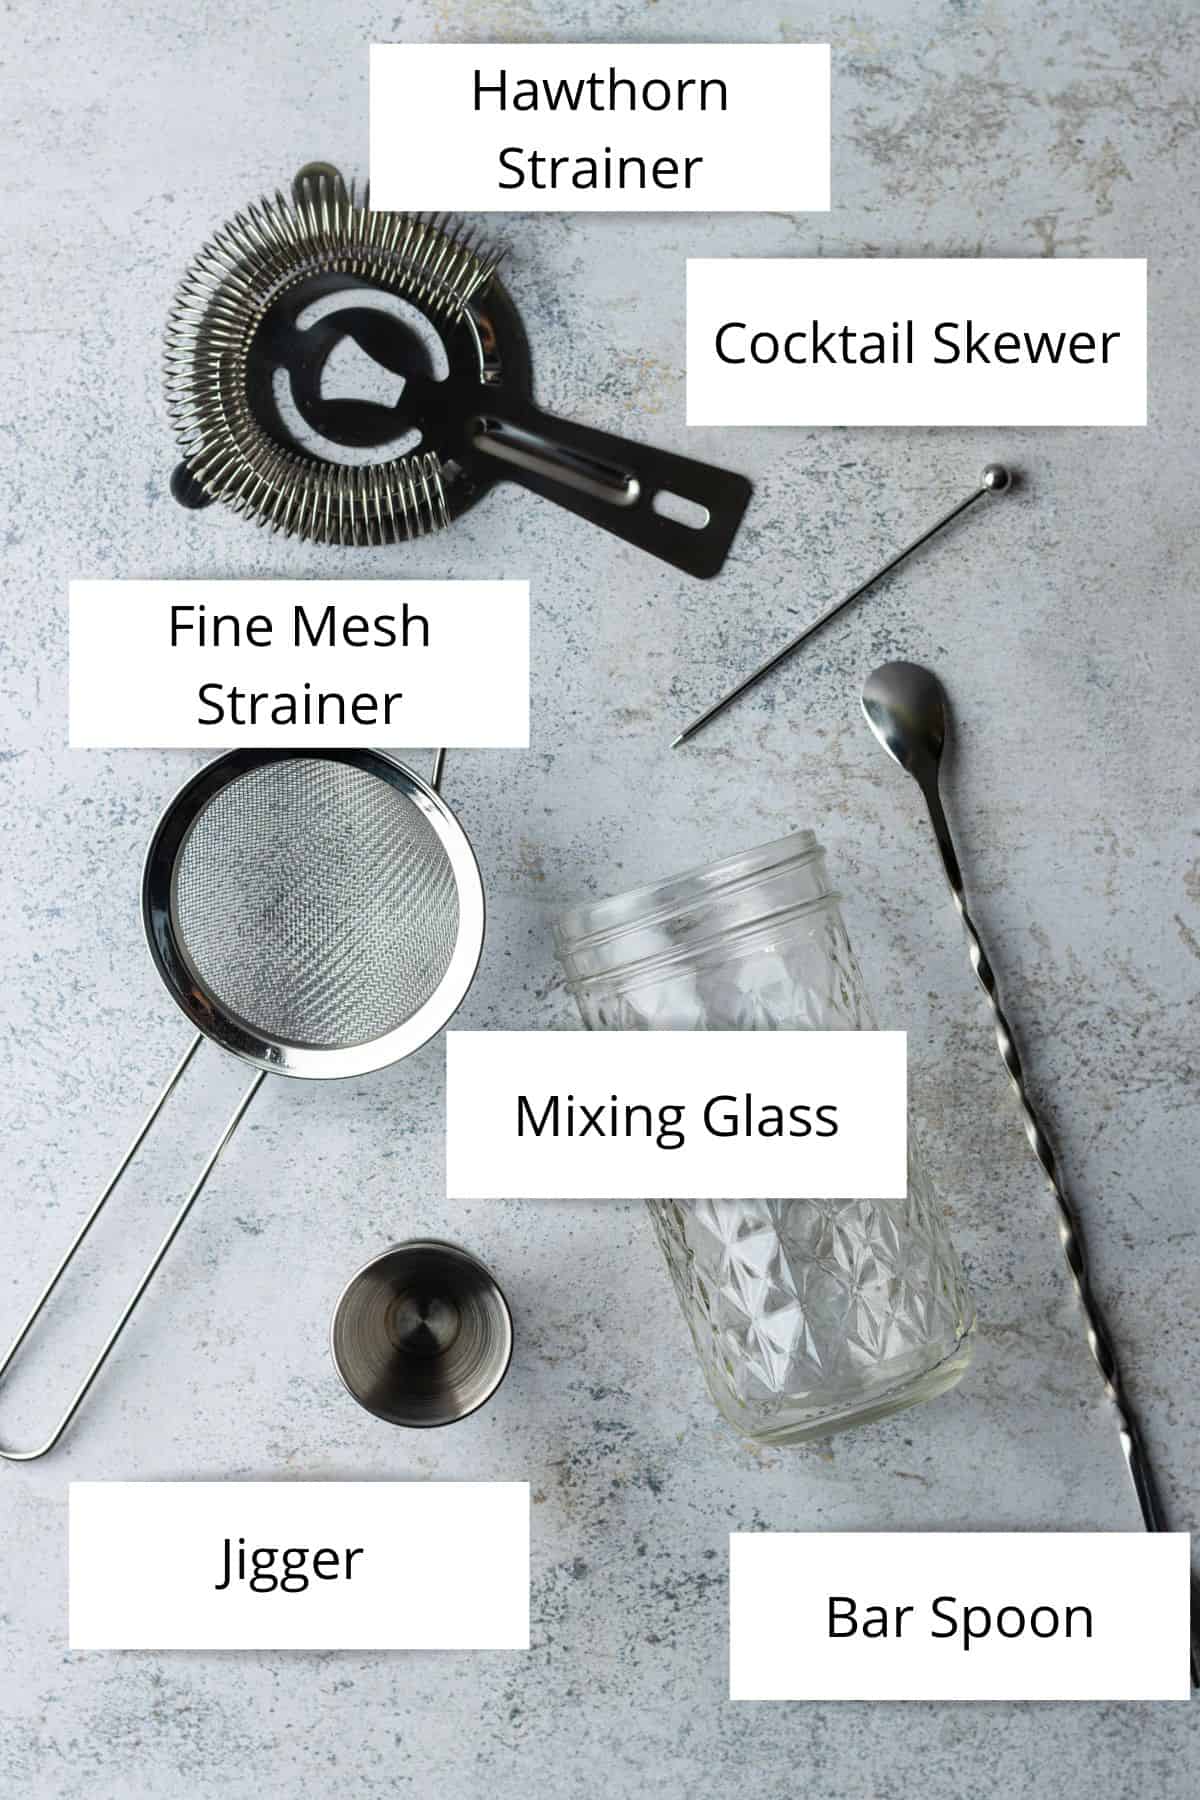 Equipment needs to make martini's including strainers, cocktail skewer, jigger, mixing glass and a bar spoon.